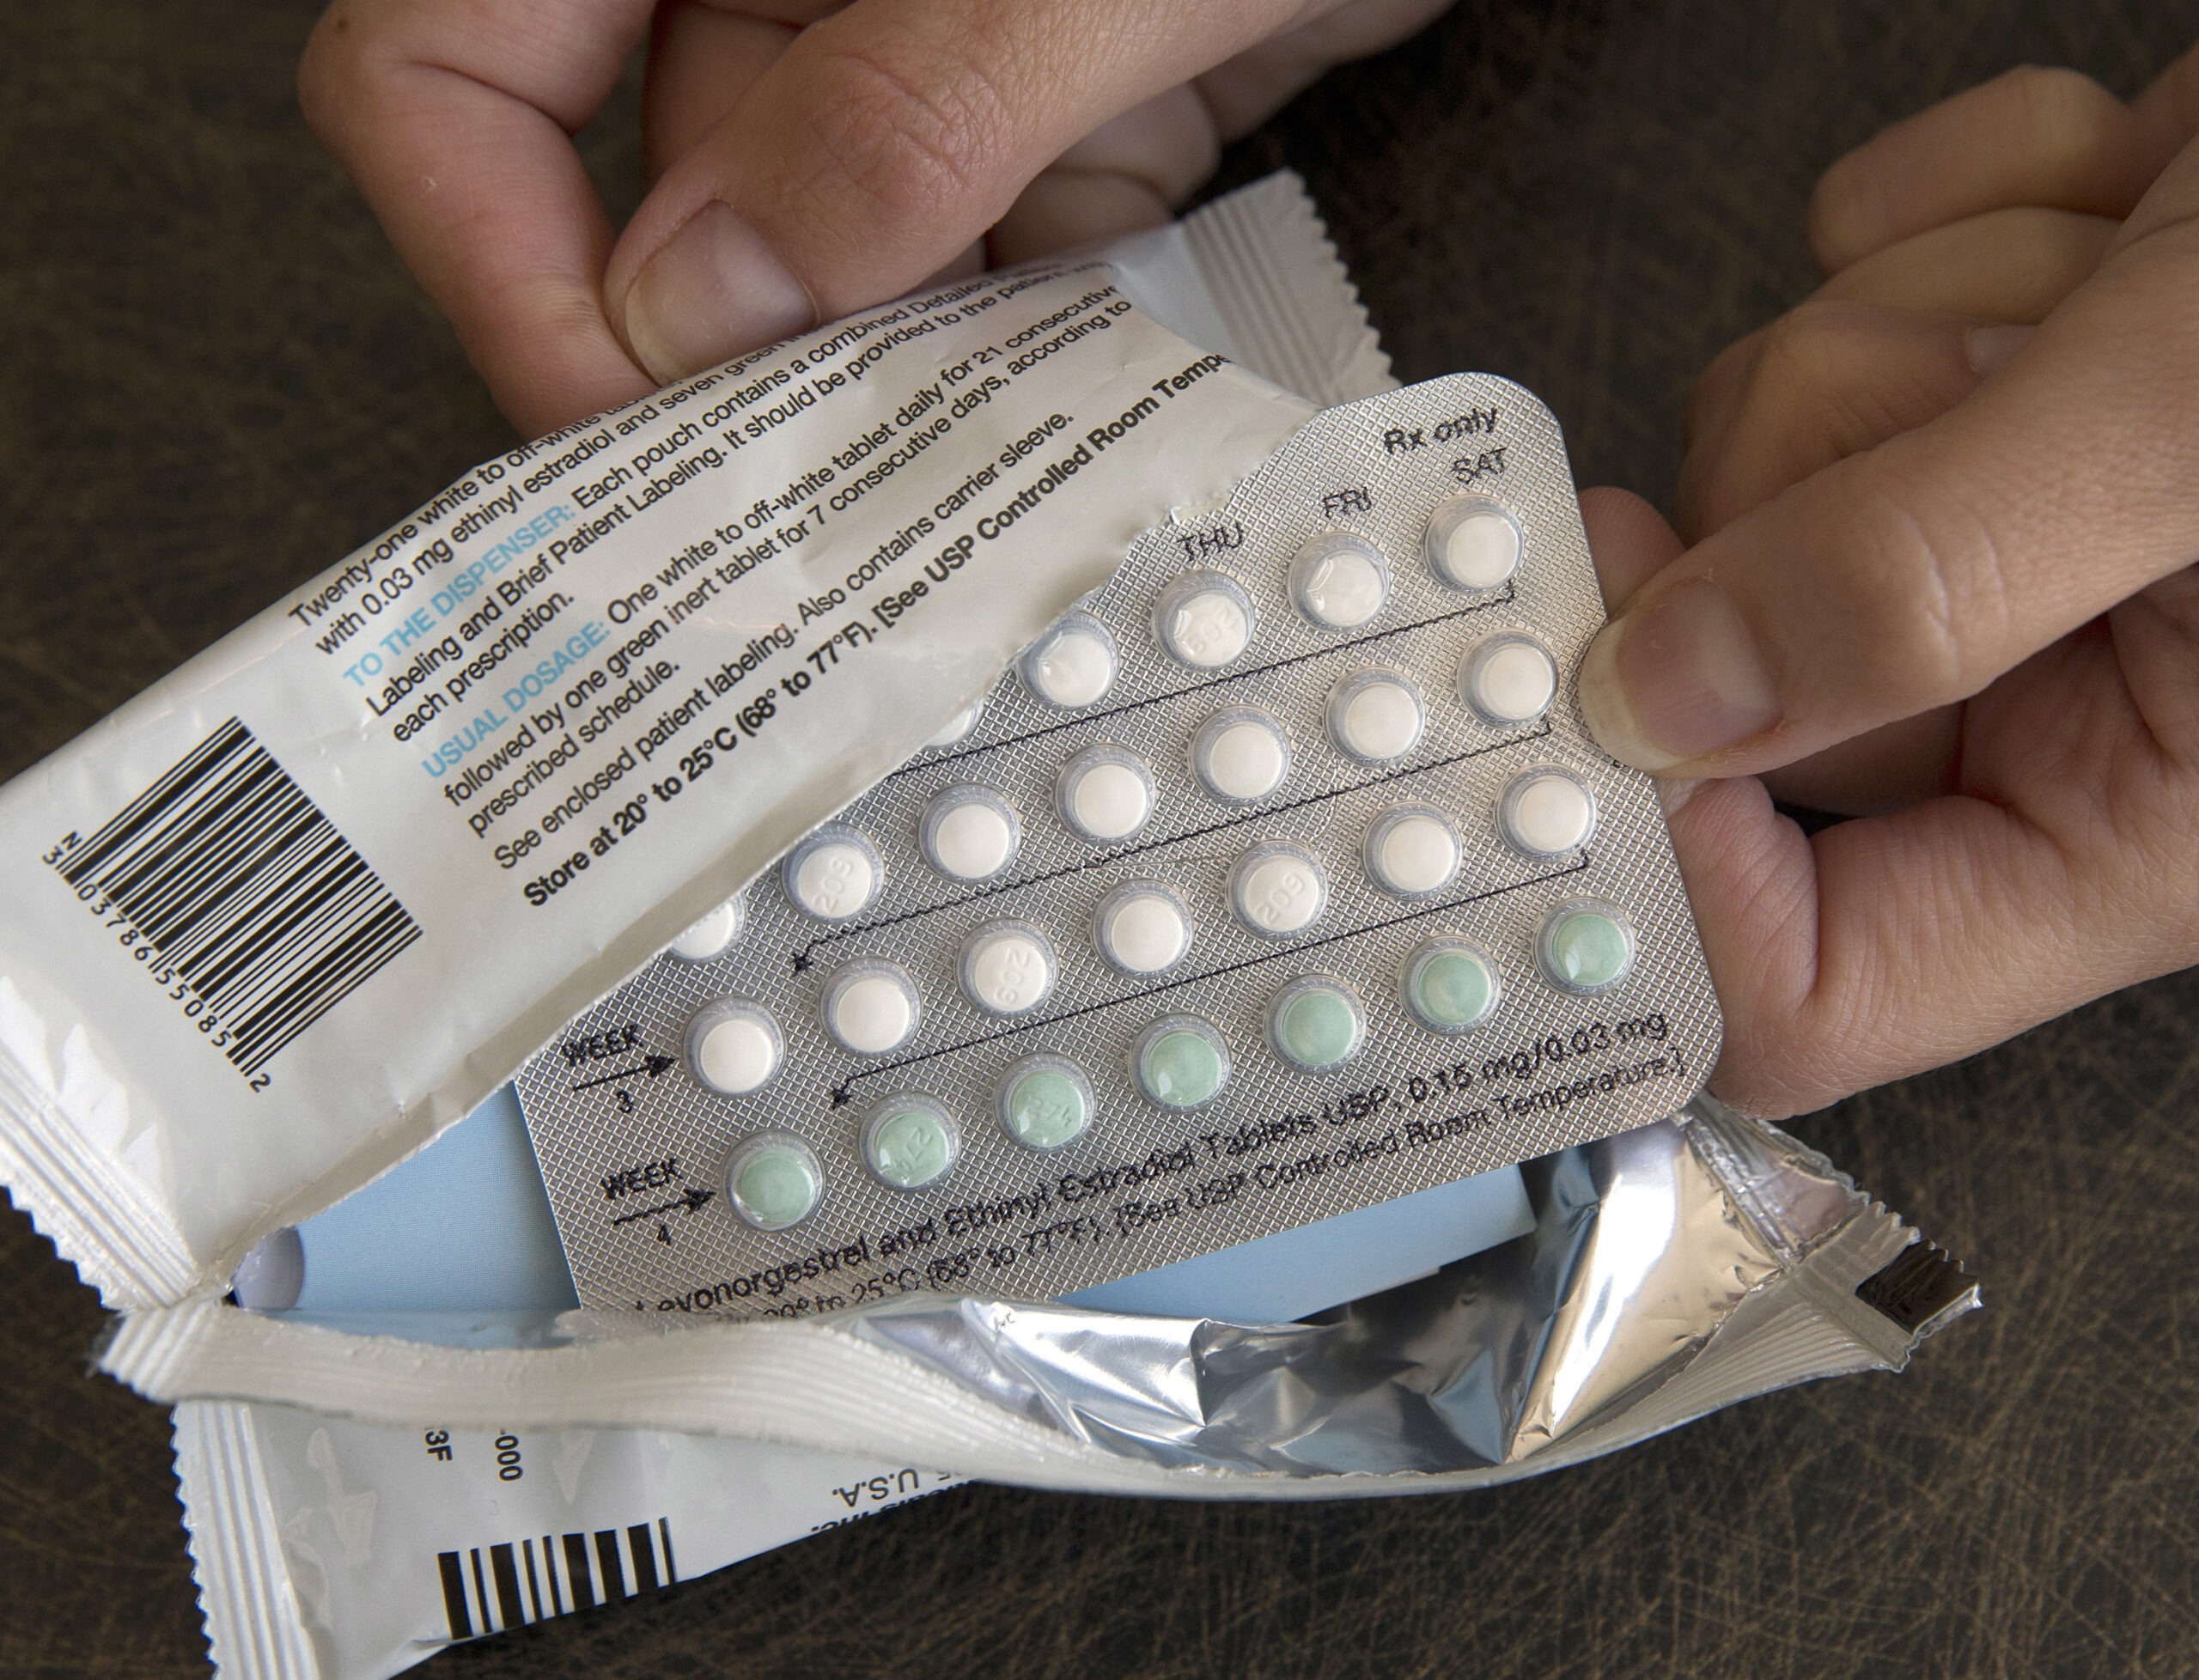 A pack of birth control pills